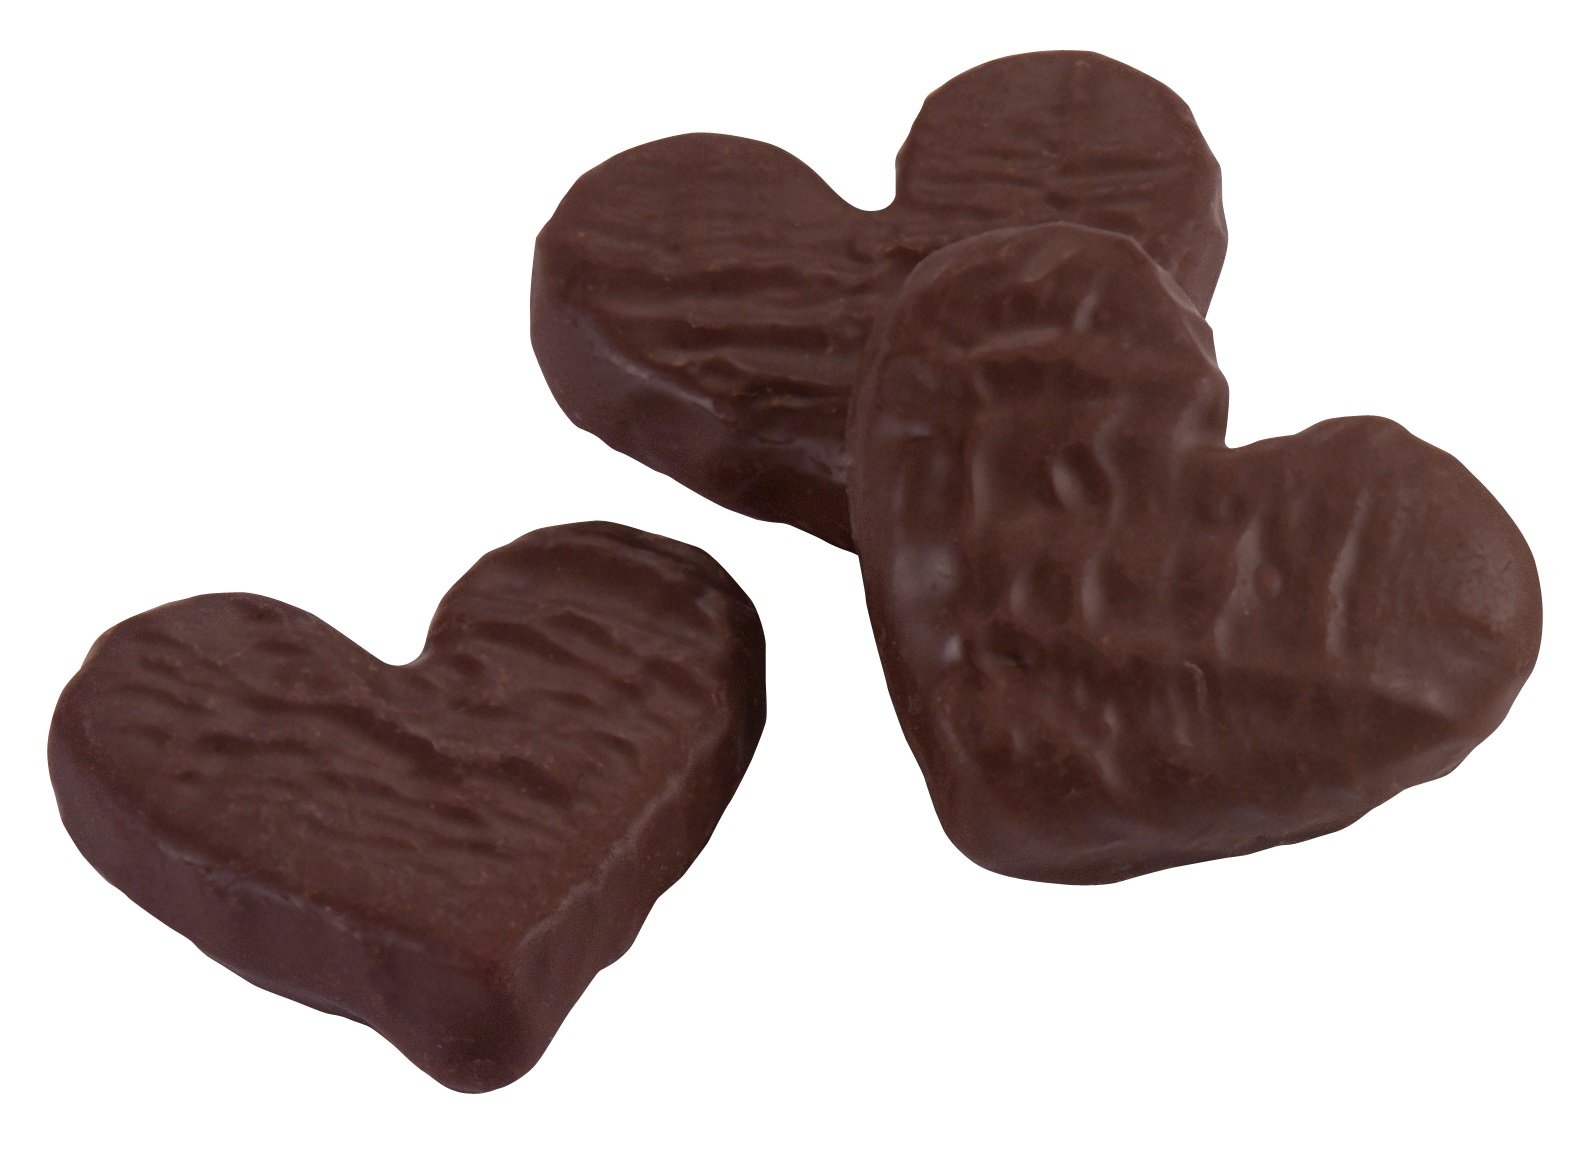 Chocolate Covered Kendal Mint Cake Hearts 3 pack - Single Sample Bag